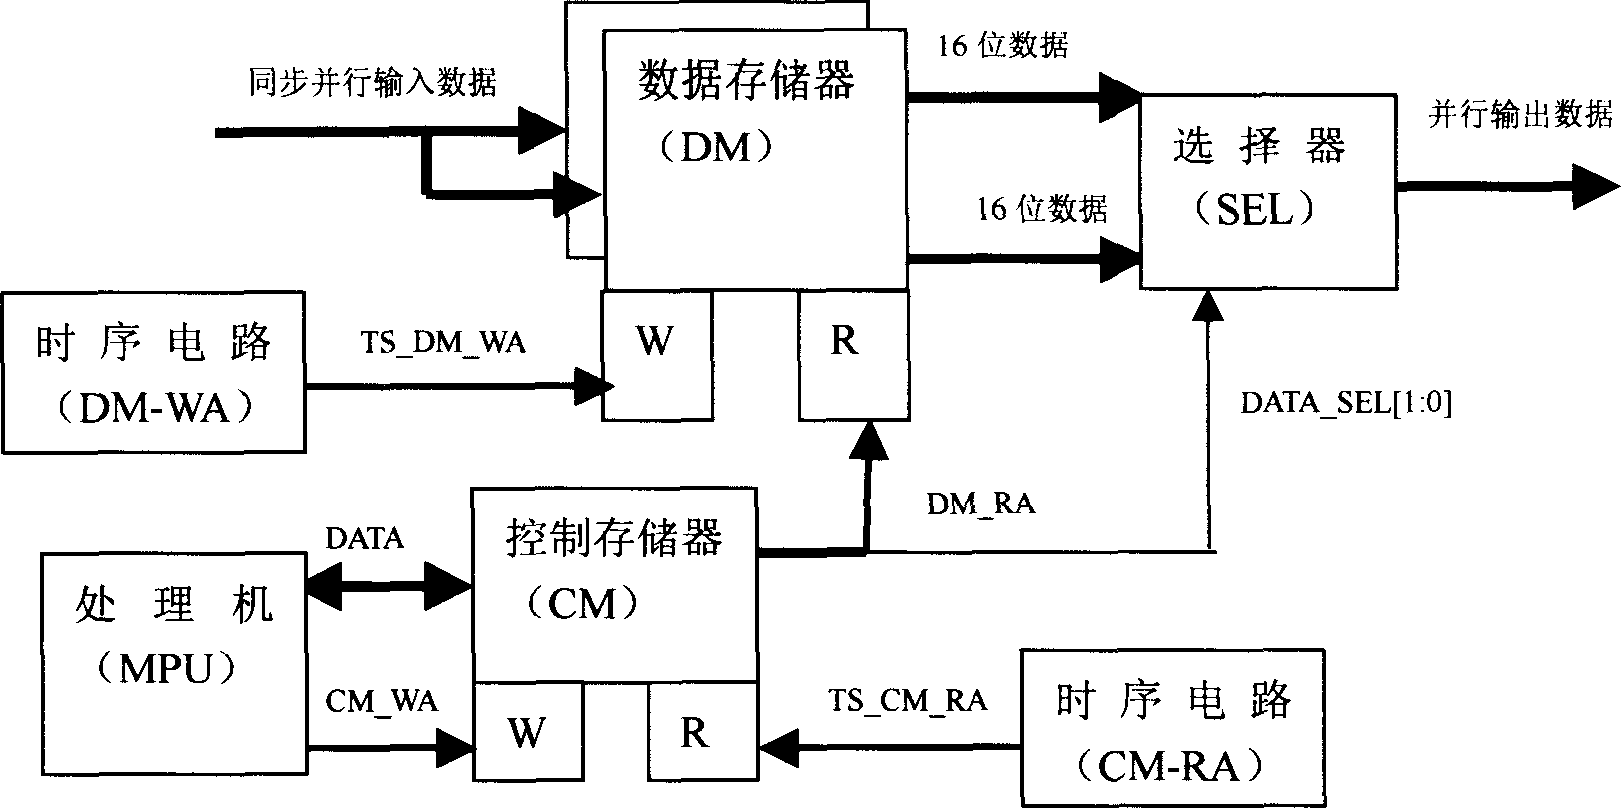 Circuit module for realizing high-speed time division switching